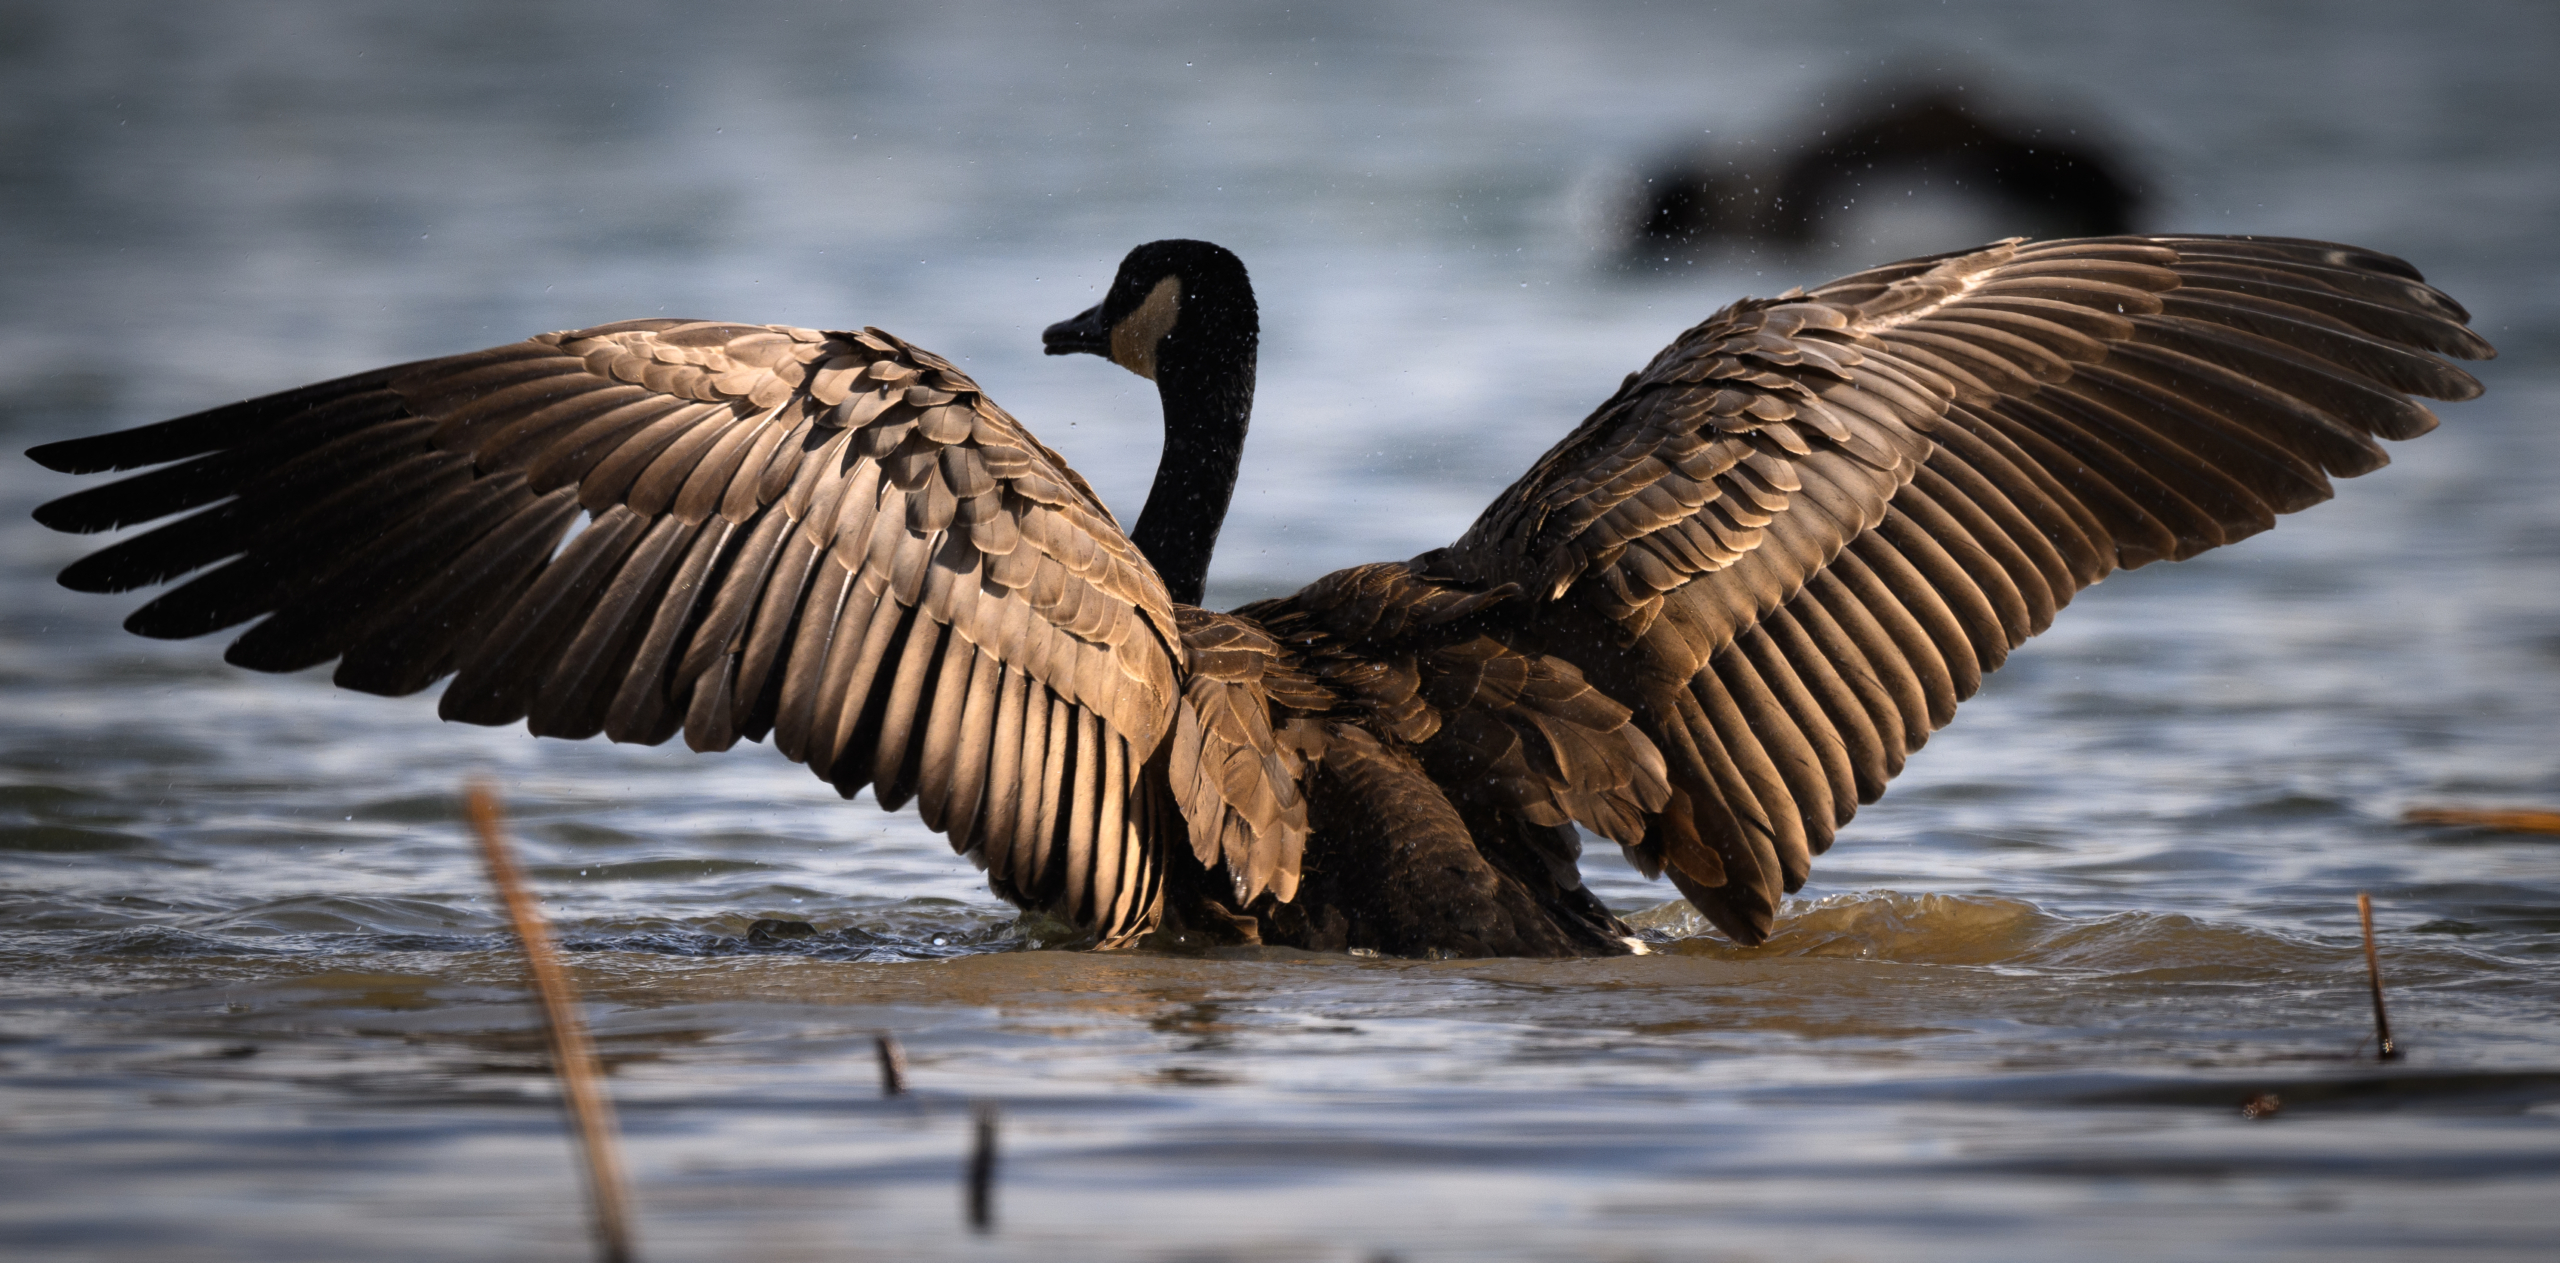 A Canada goose (Branta canadensis) flaps its wings to dry after rolling in the waters of Lake Springfield in Springfield, Missouri. Canada geese will roll in water, then flatly bang their wings on the water, then finish by waving the wings back and forth to dry, with a good ruffling of feathers for good measure.

Canada geese are particularly fastidious about keeping their feathers clean and dry, pulling dirt and water off each feather using the ridges on their mandibles. A good shake and ruffling of their feathers will get them dry. That is followed by oiling their feathers with their bill with oil from the base of their tail. The oil keeps the feathers insulated, dry, and free of parasites.